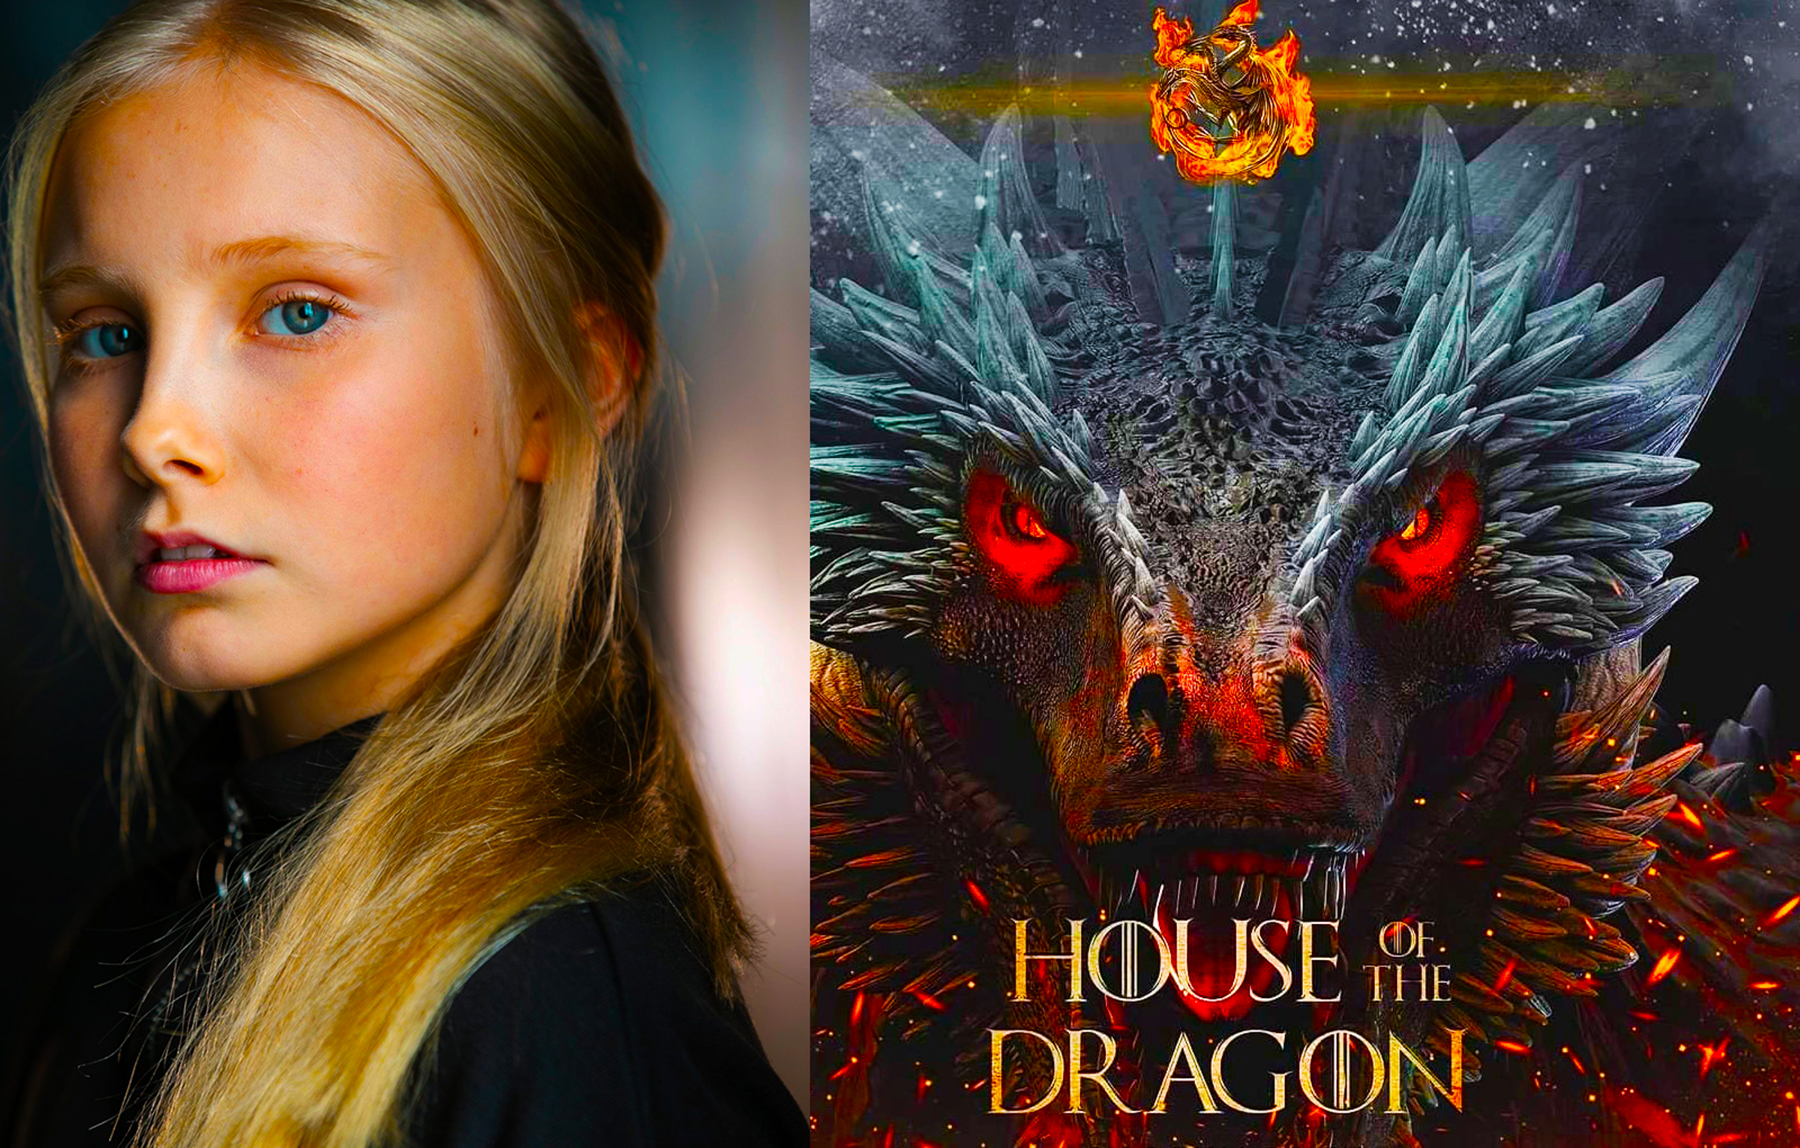 Maddie Evans, House of the Dragon, Cruella, Harry Potter and Fantastic Beasts actress, is a student of King's InterHigh School